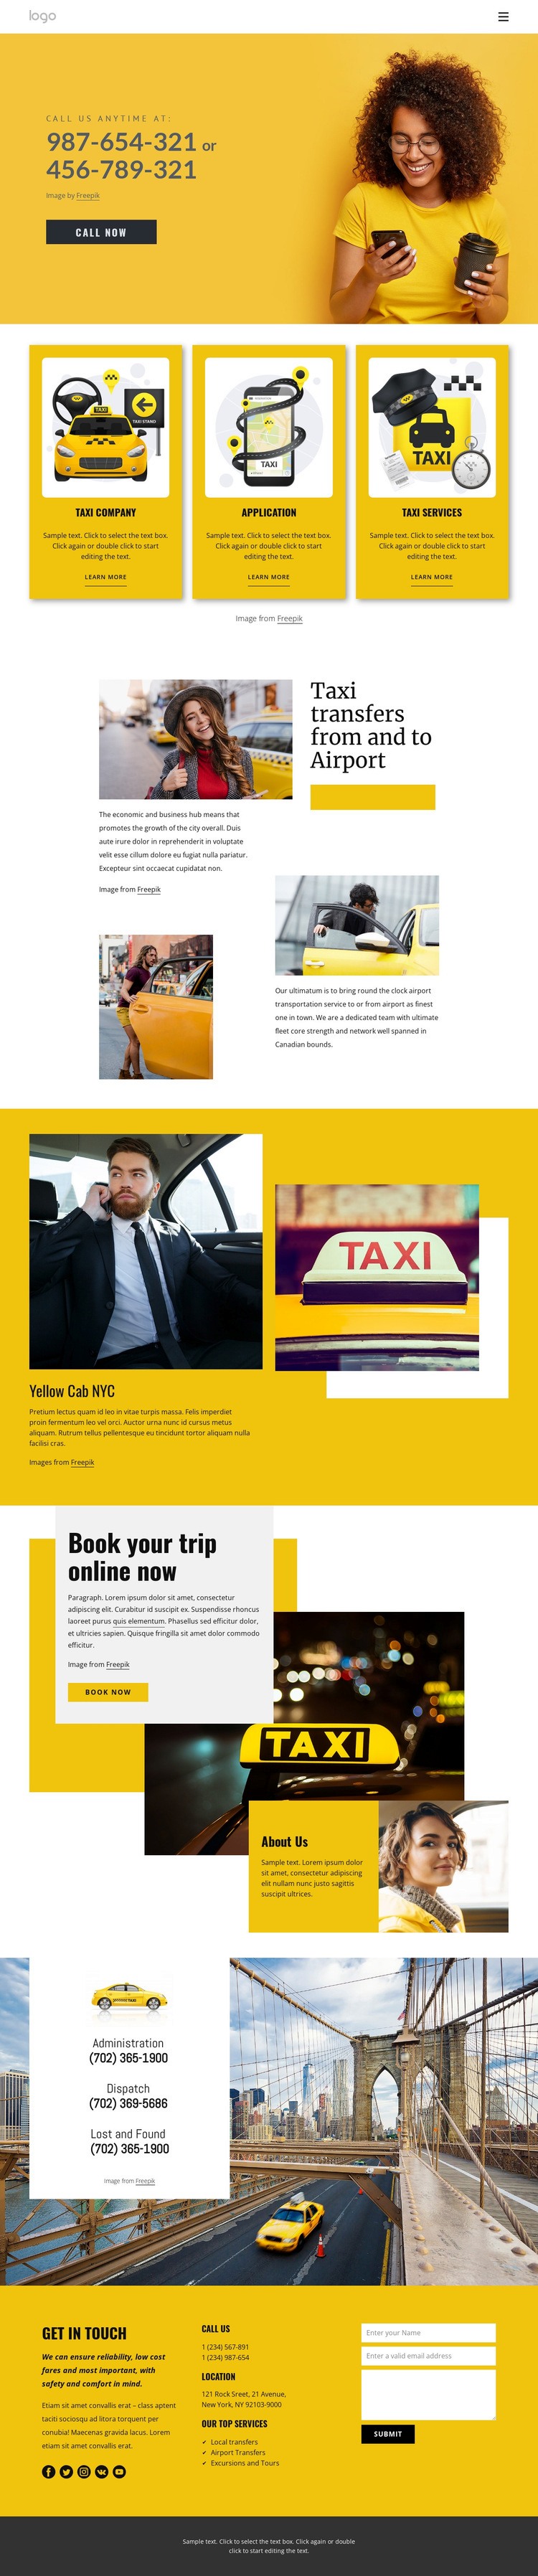 Quality taxi service Homepage Design